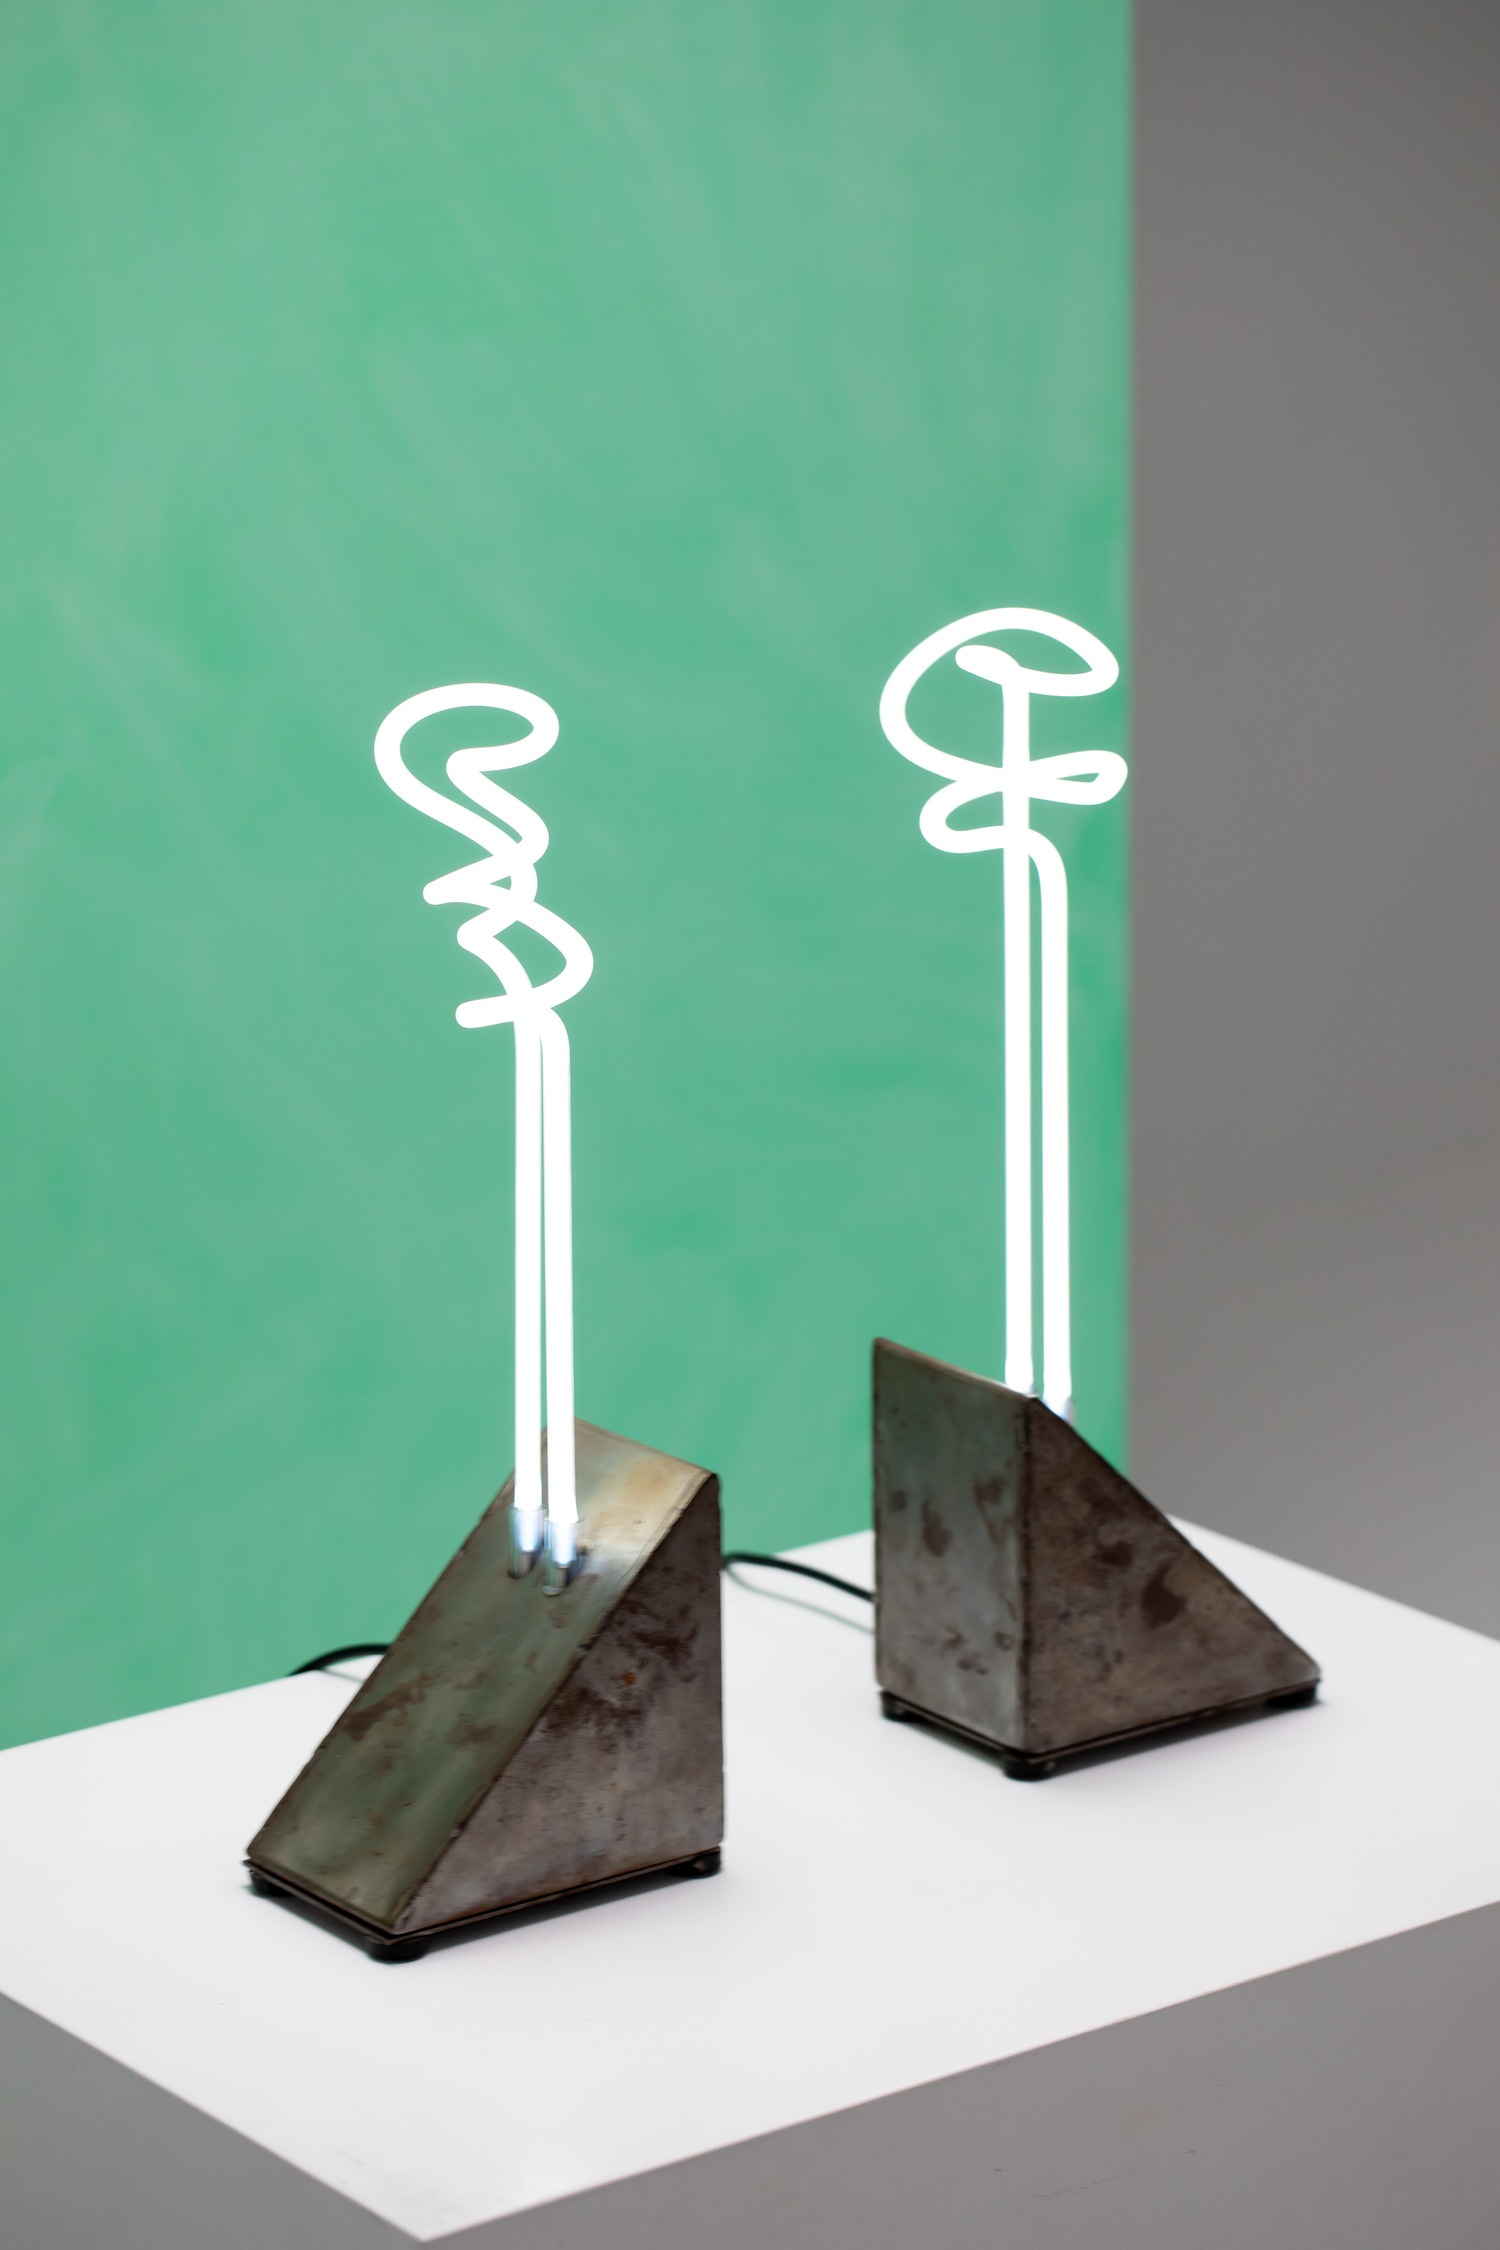 Pair of neon lights / bookends by Pentagon group / Gerd Arens